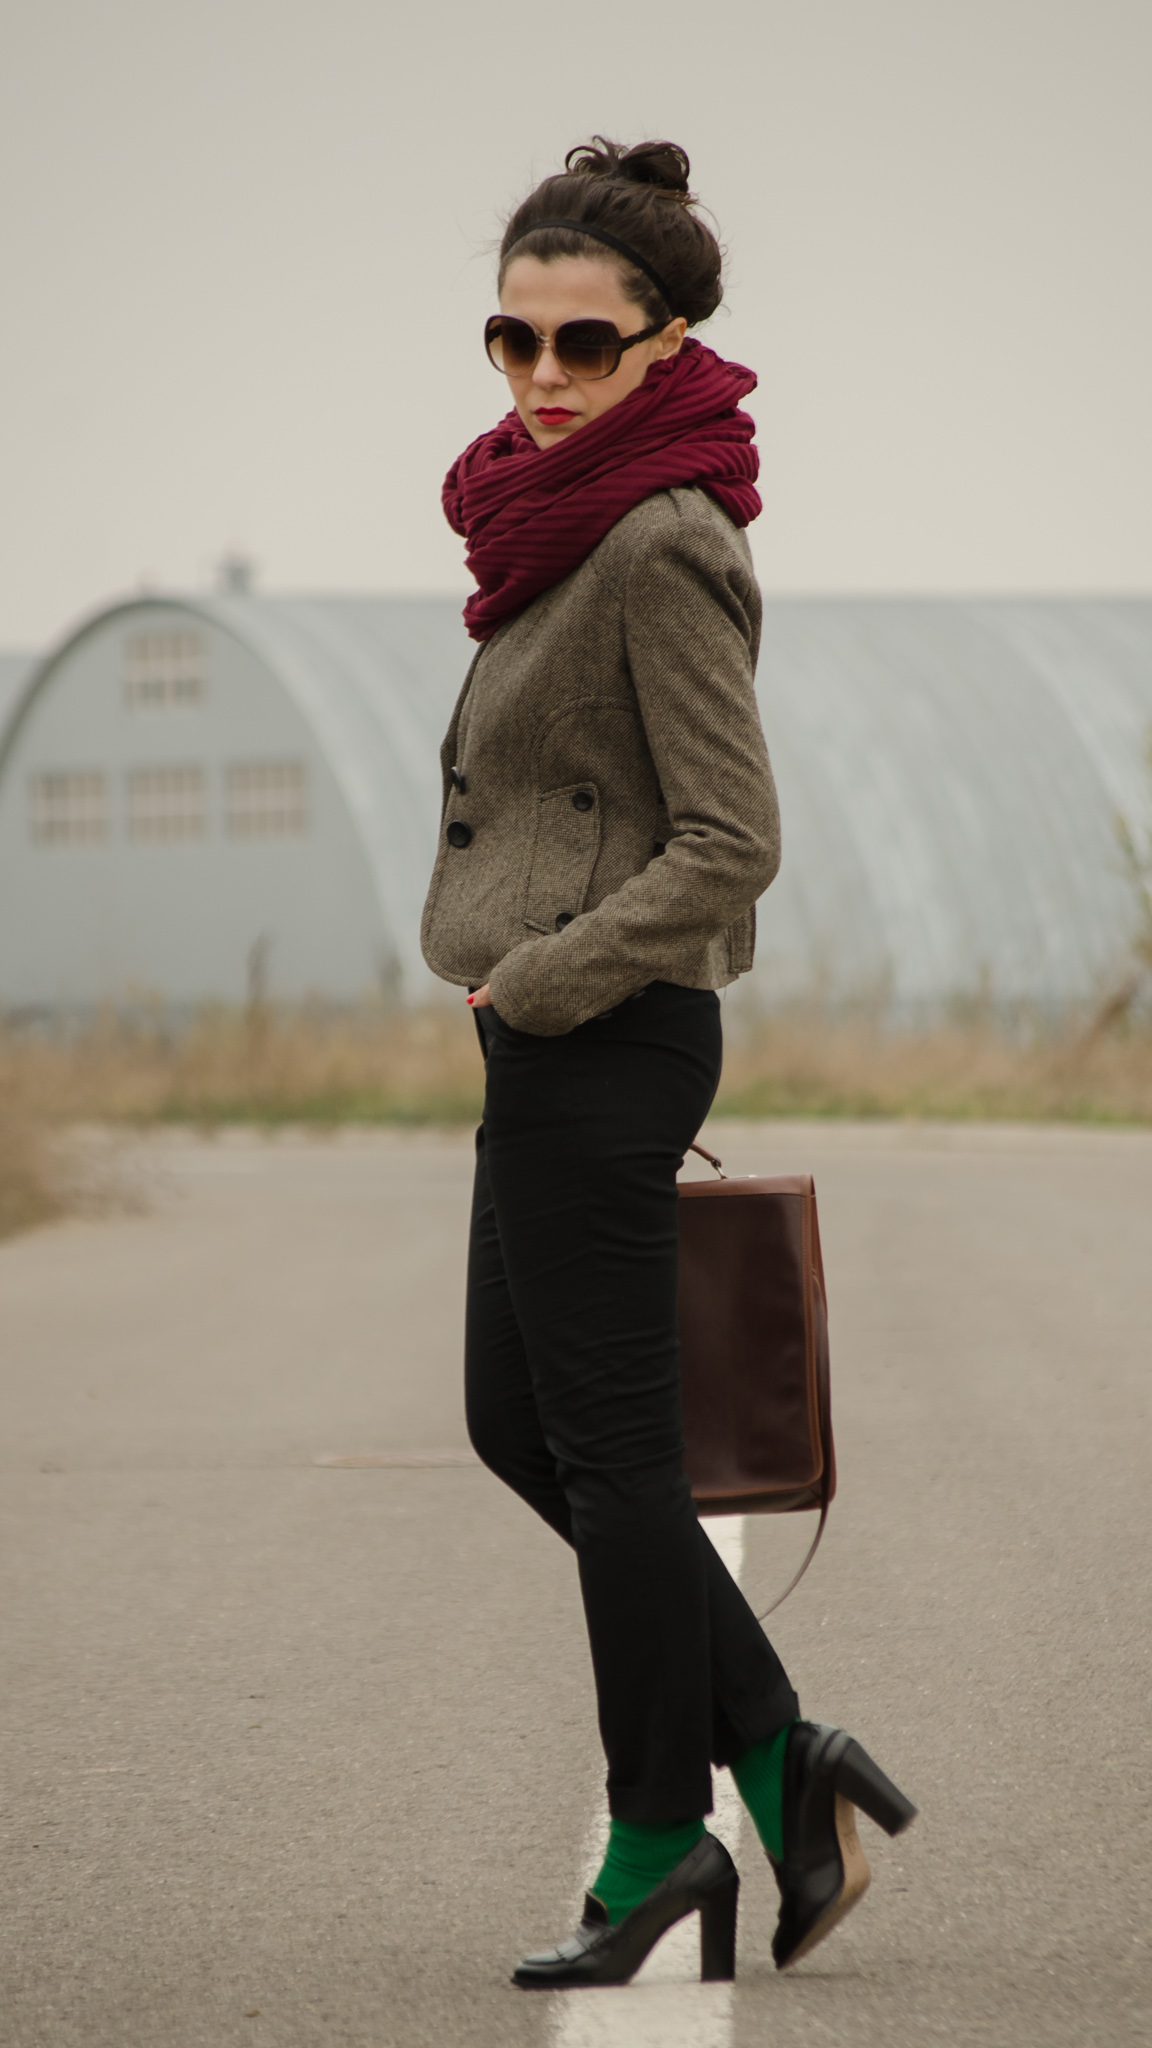 black pants green socks heels over sized scarf burgundy brown jacket fall autumn checkers sweater bow-tie stachel bag thrifted vero moda 